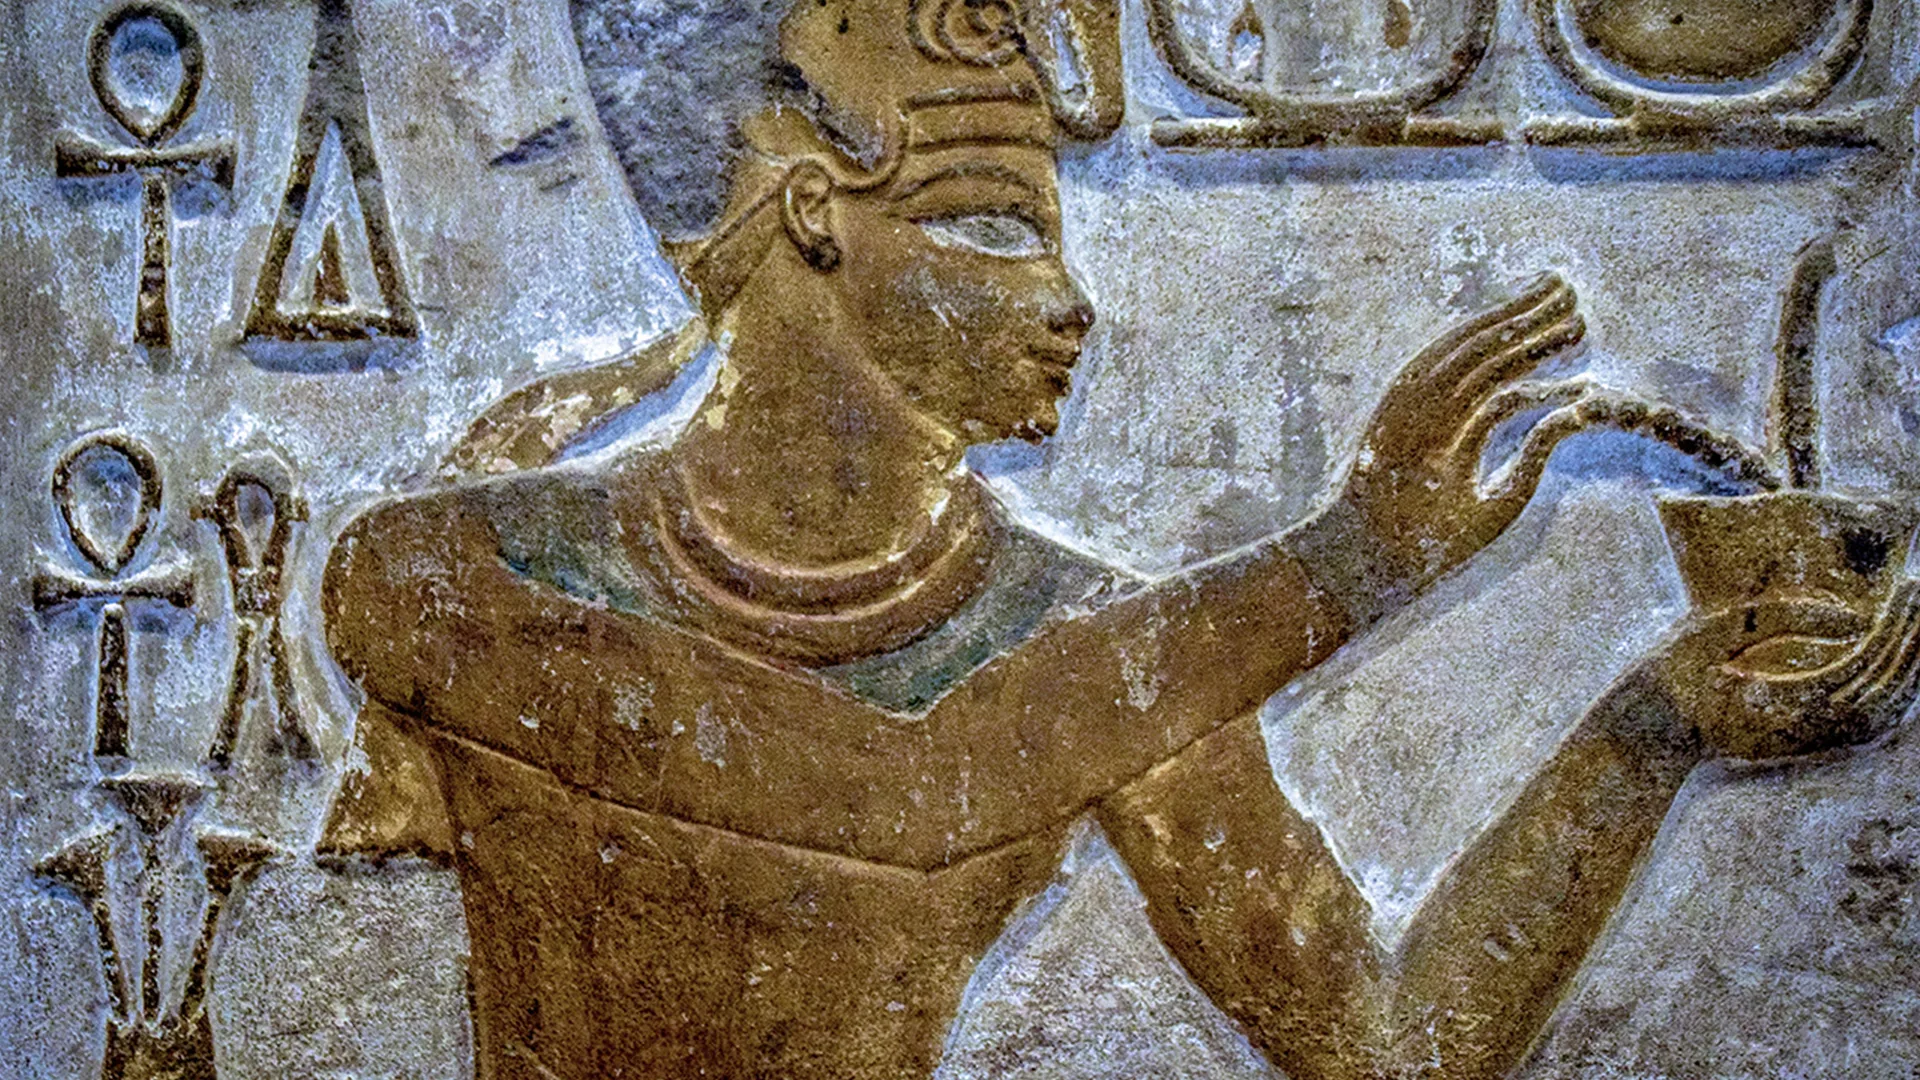 Depiction of a pharaoh in hieroglyphics